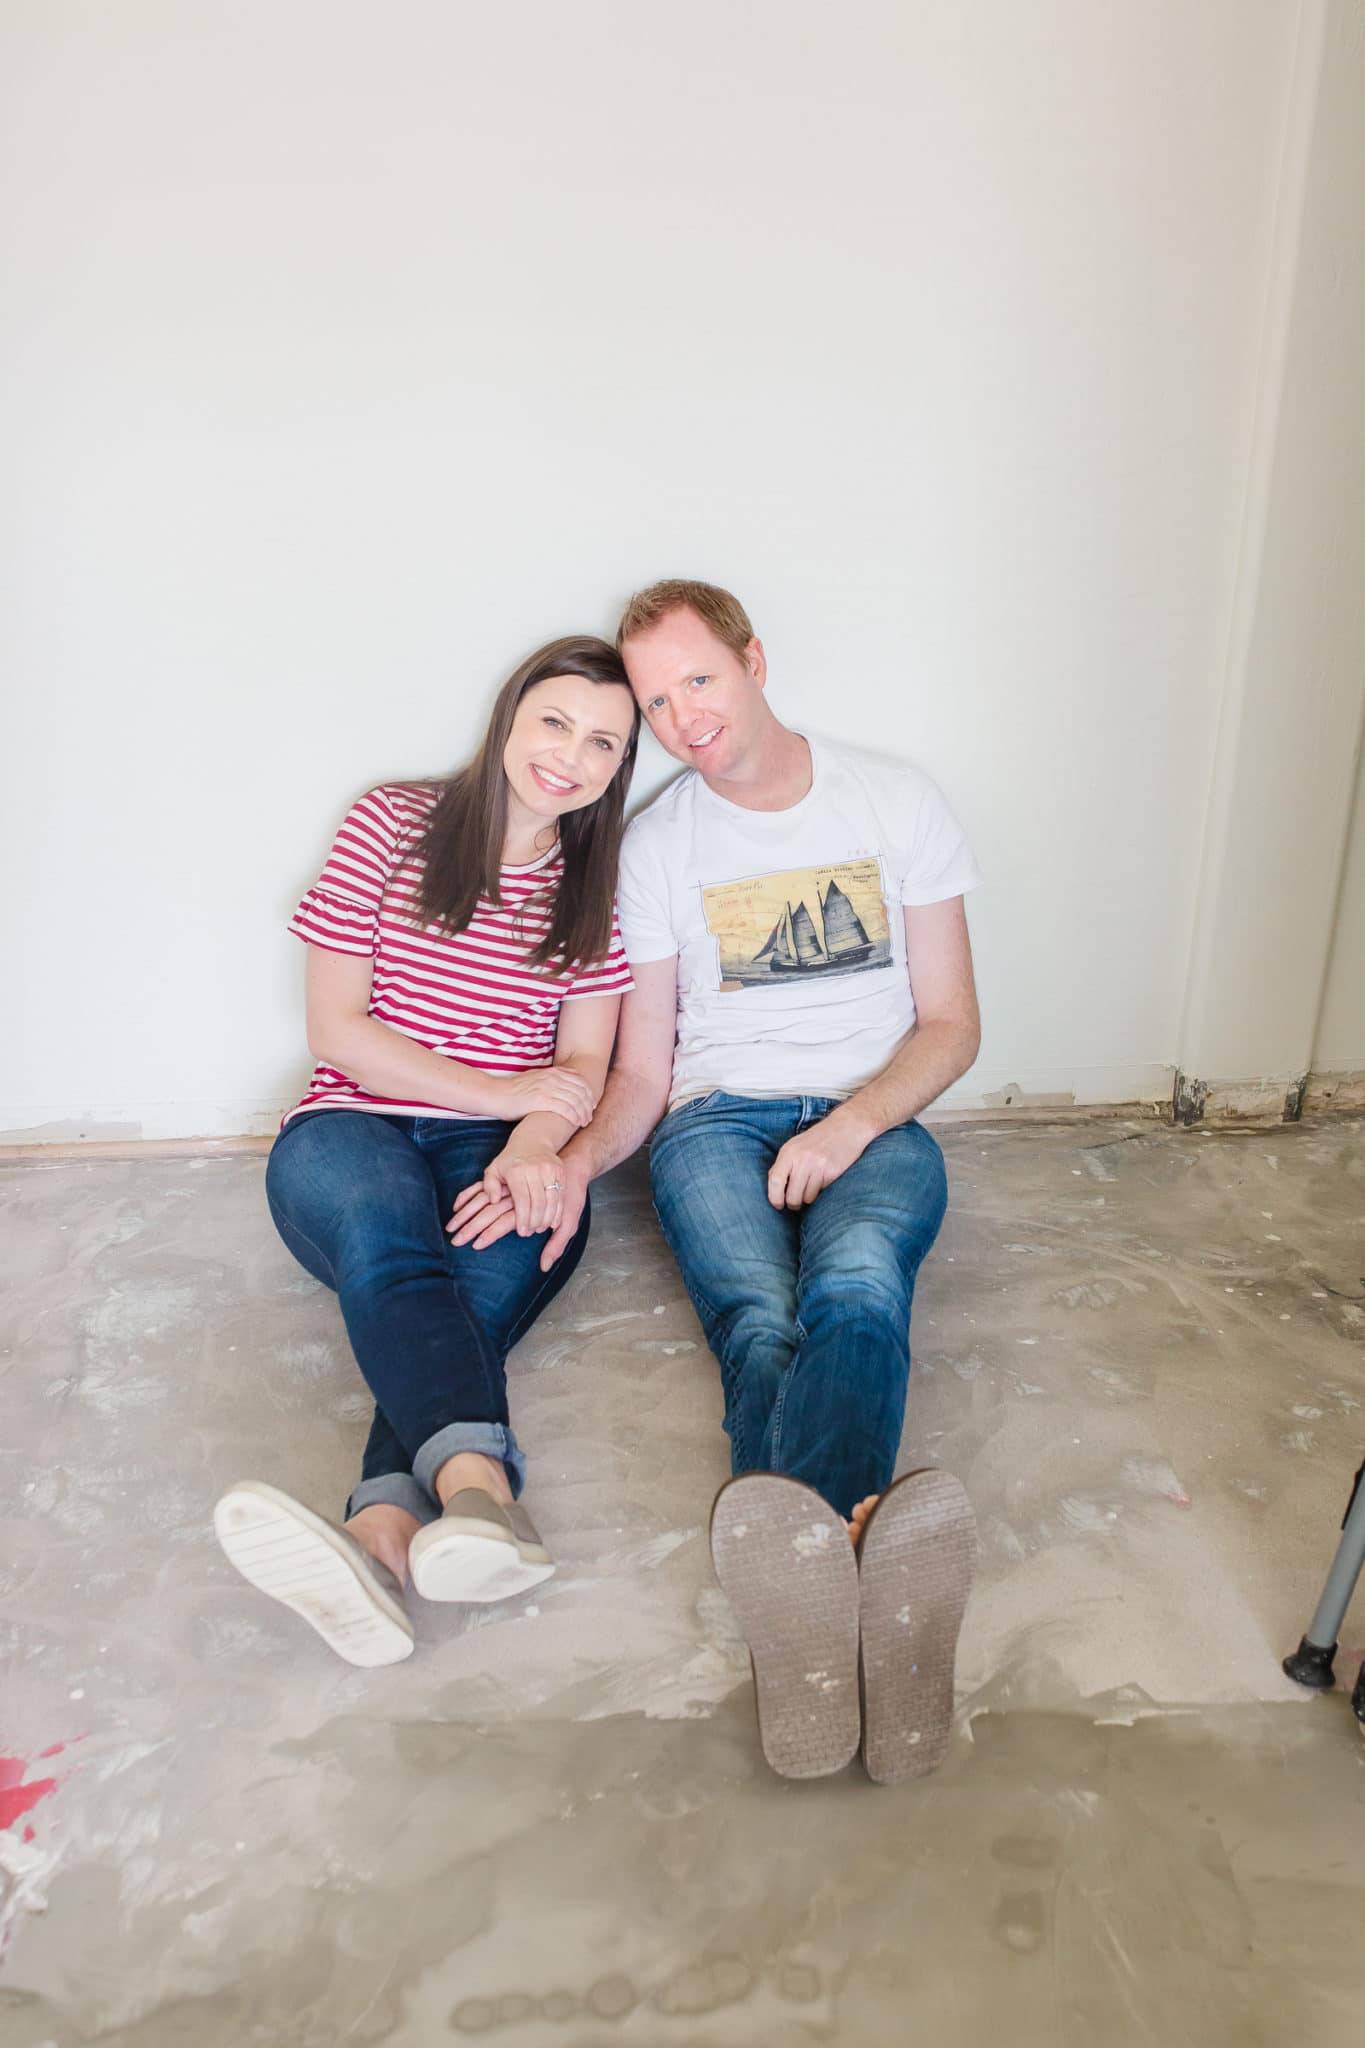 How Home Remodeling As a Couple Has Strengthened Our Marriage